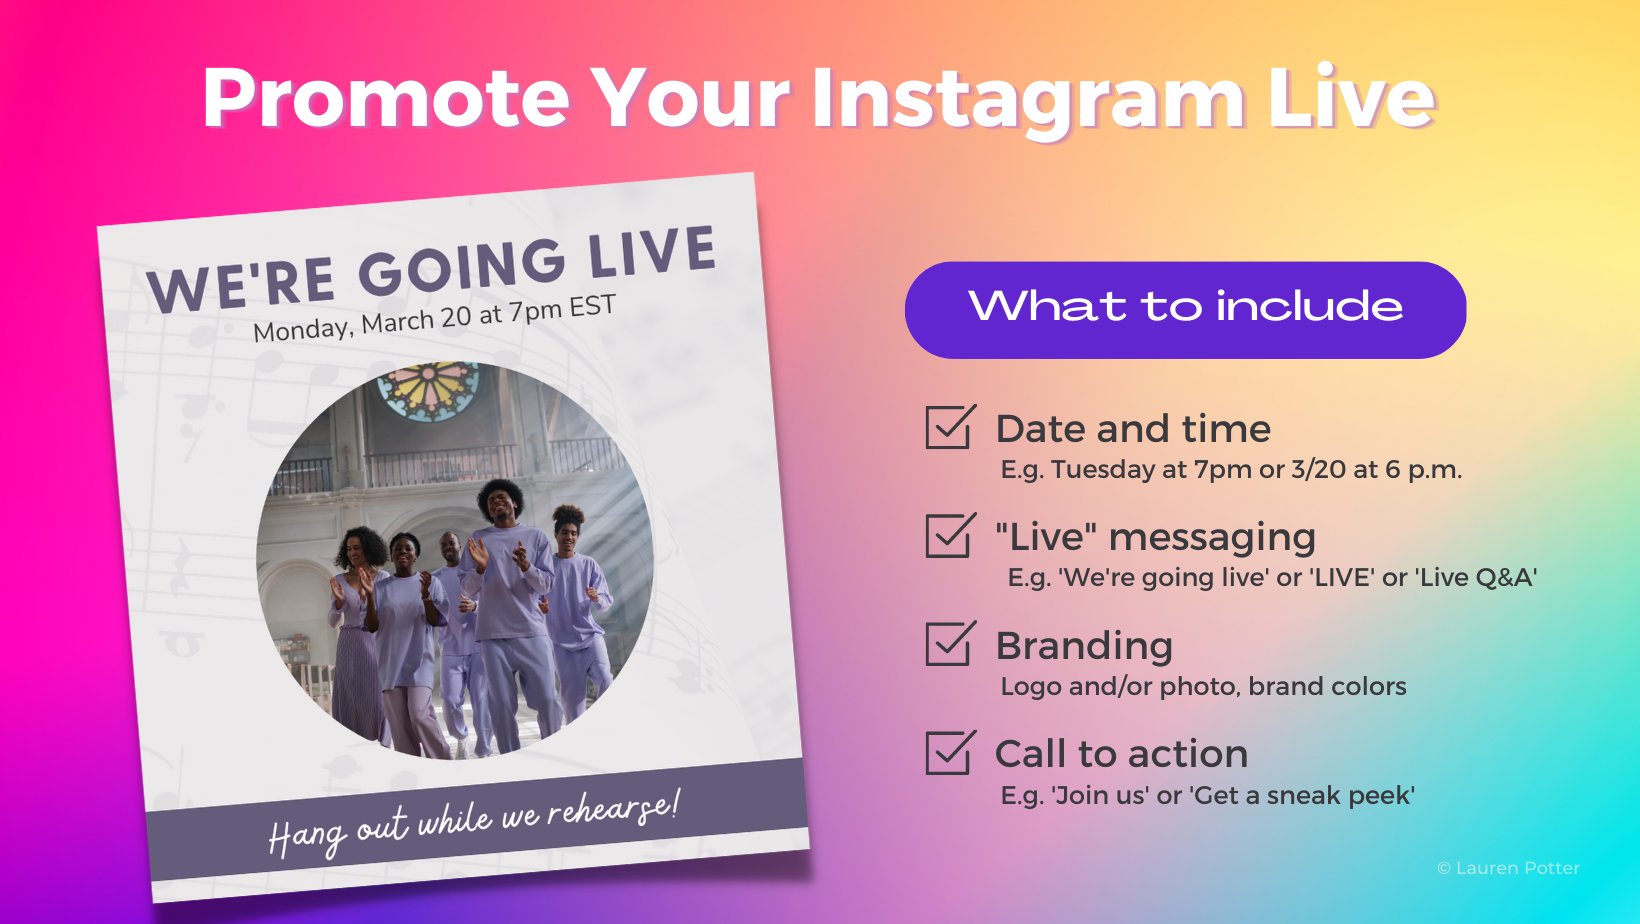 Graphic with text "Promote Your Instagram Live" and "What to include": date and time, messaging, branding, and call to action